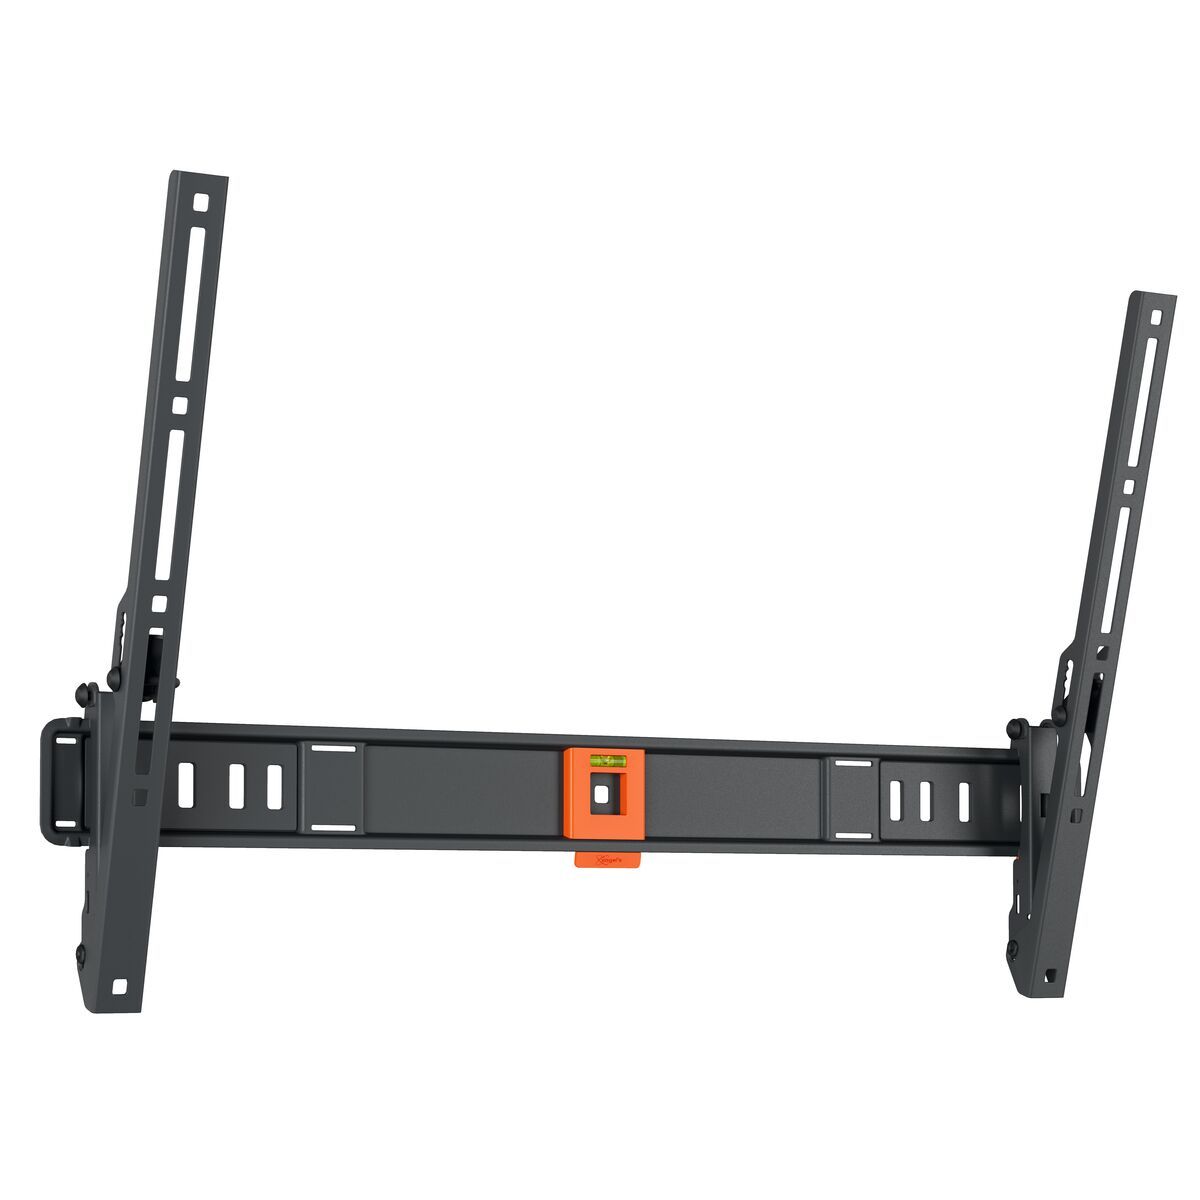 Vogel's TVM 1615 Tilting TV Wall Mount - Suitable for 40 up to 77 inch TVs - Tilt up to 15° - Product